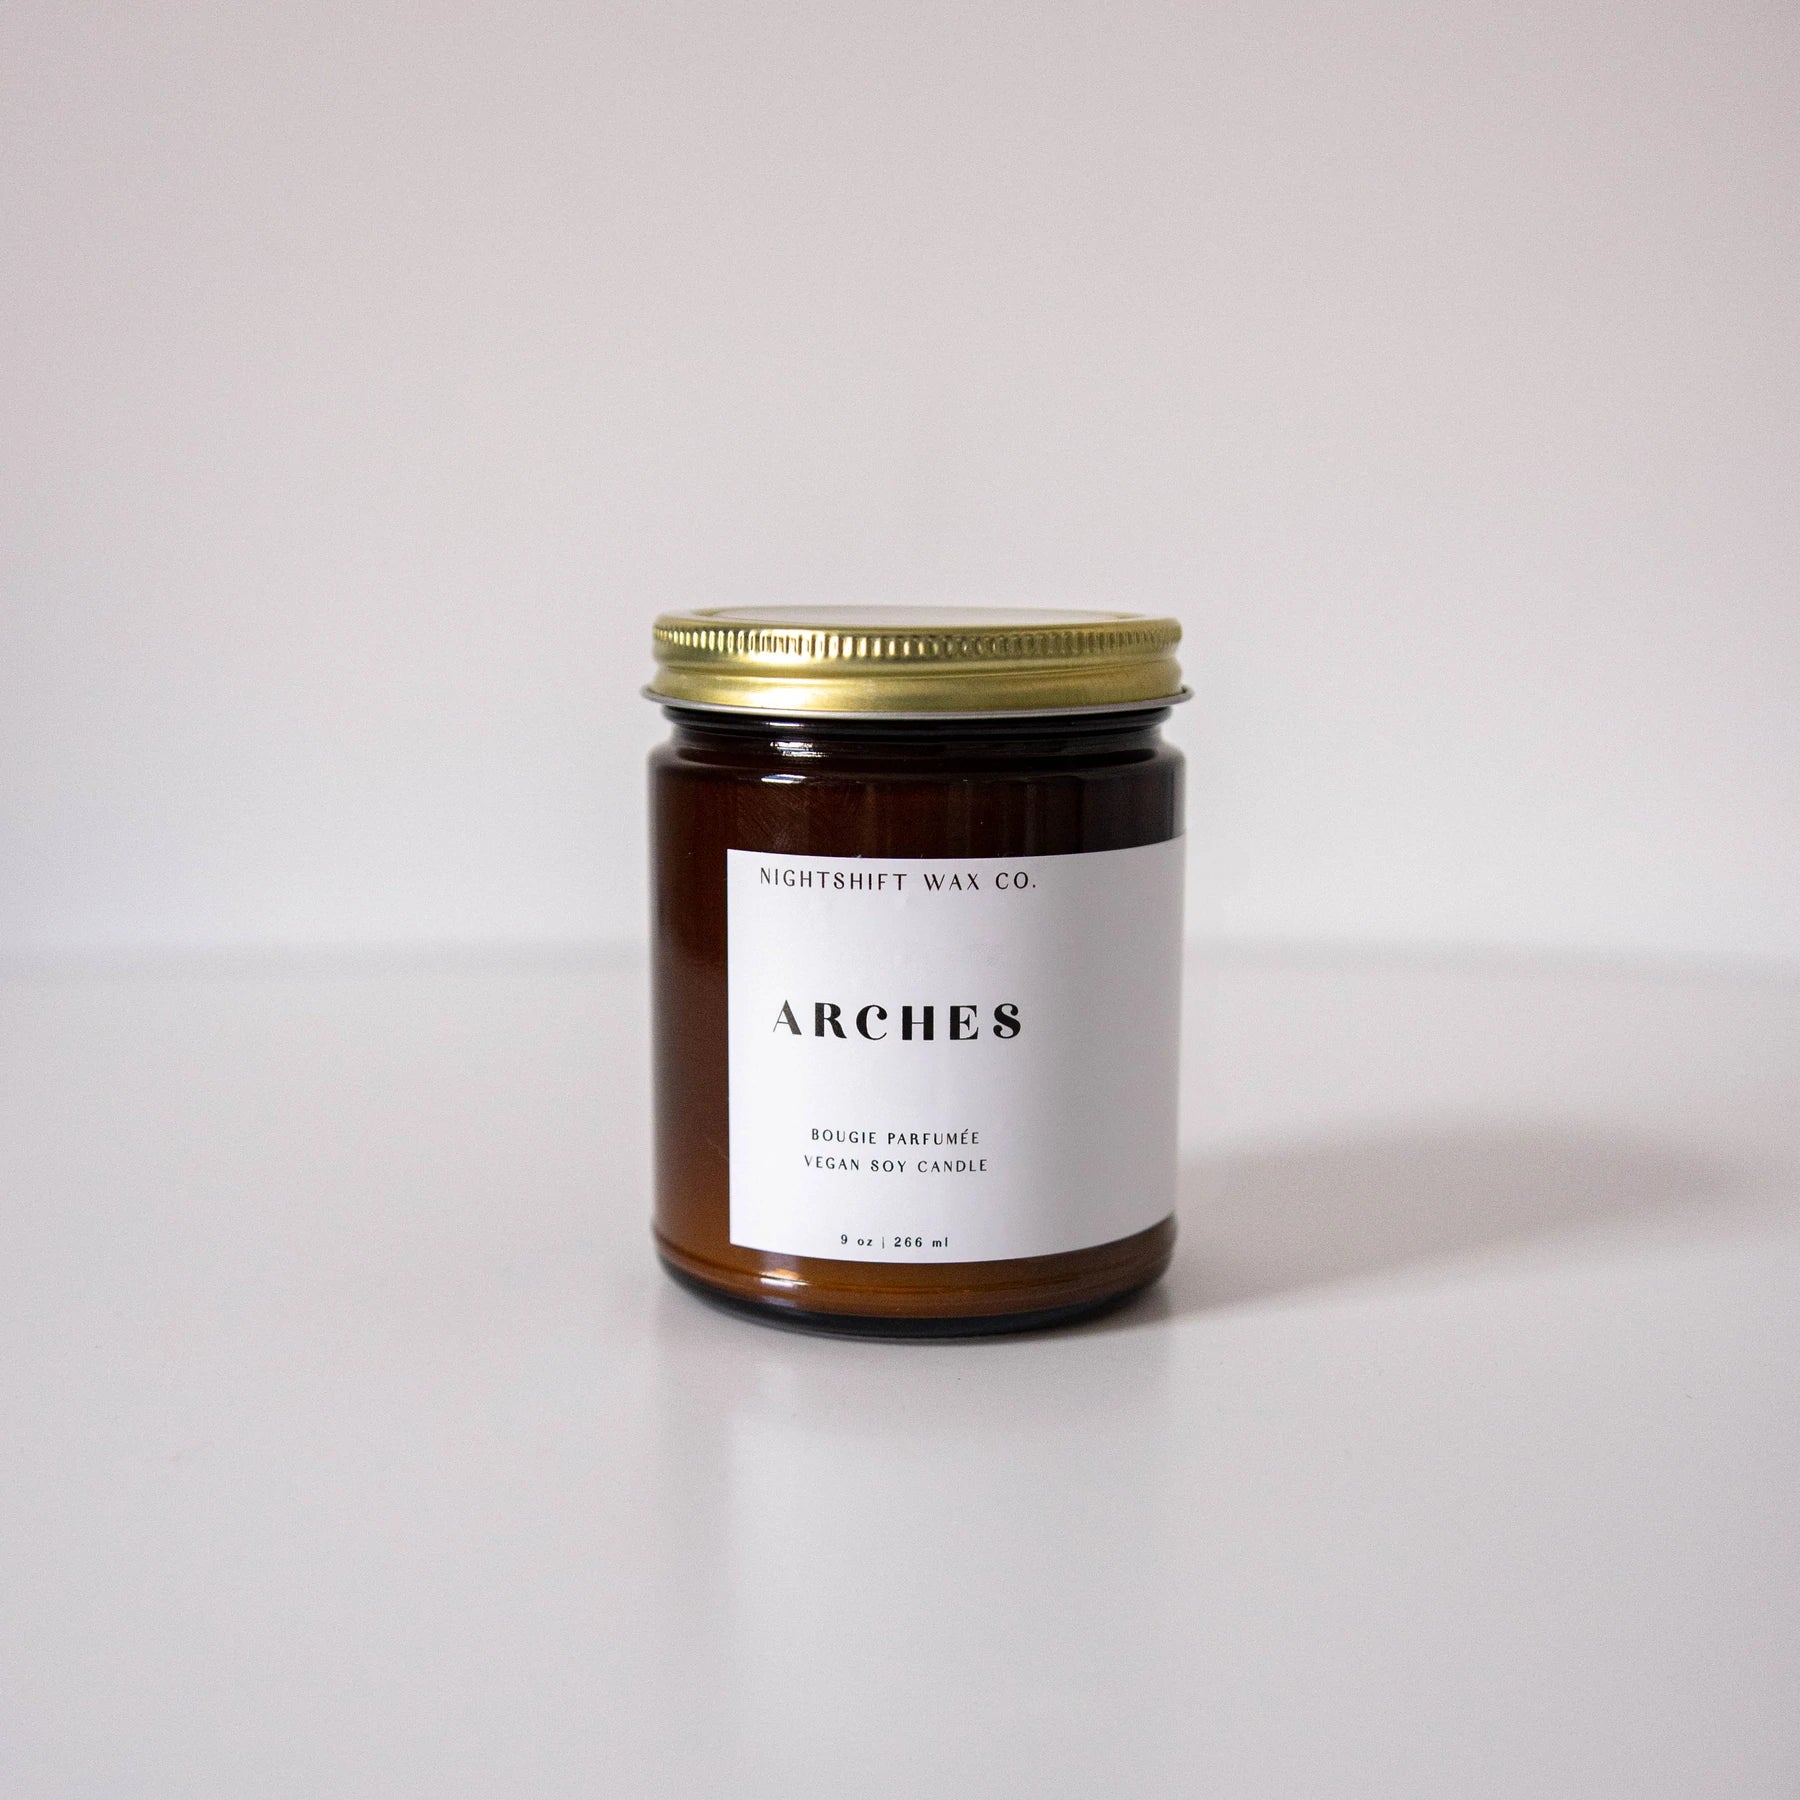 Nightshift Wax Co. Arches Soy Candle | Prelude & Dawn | Los Angeles, CA